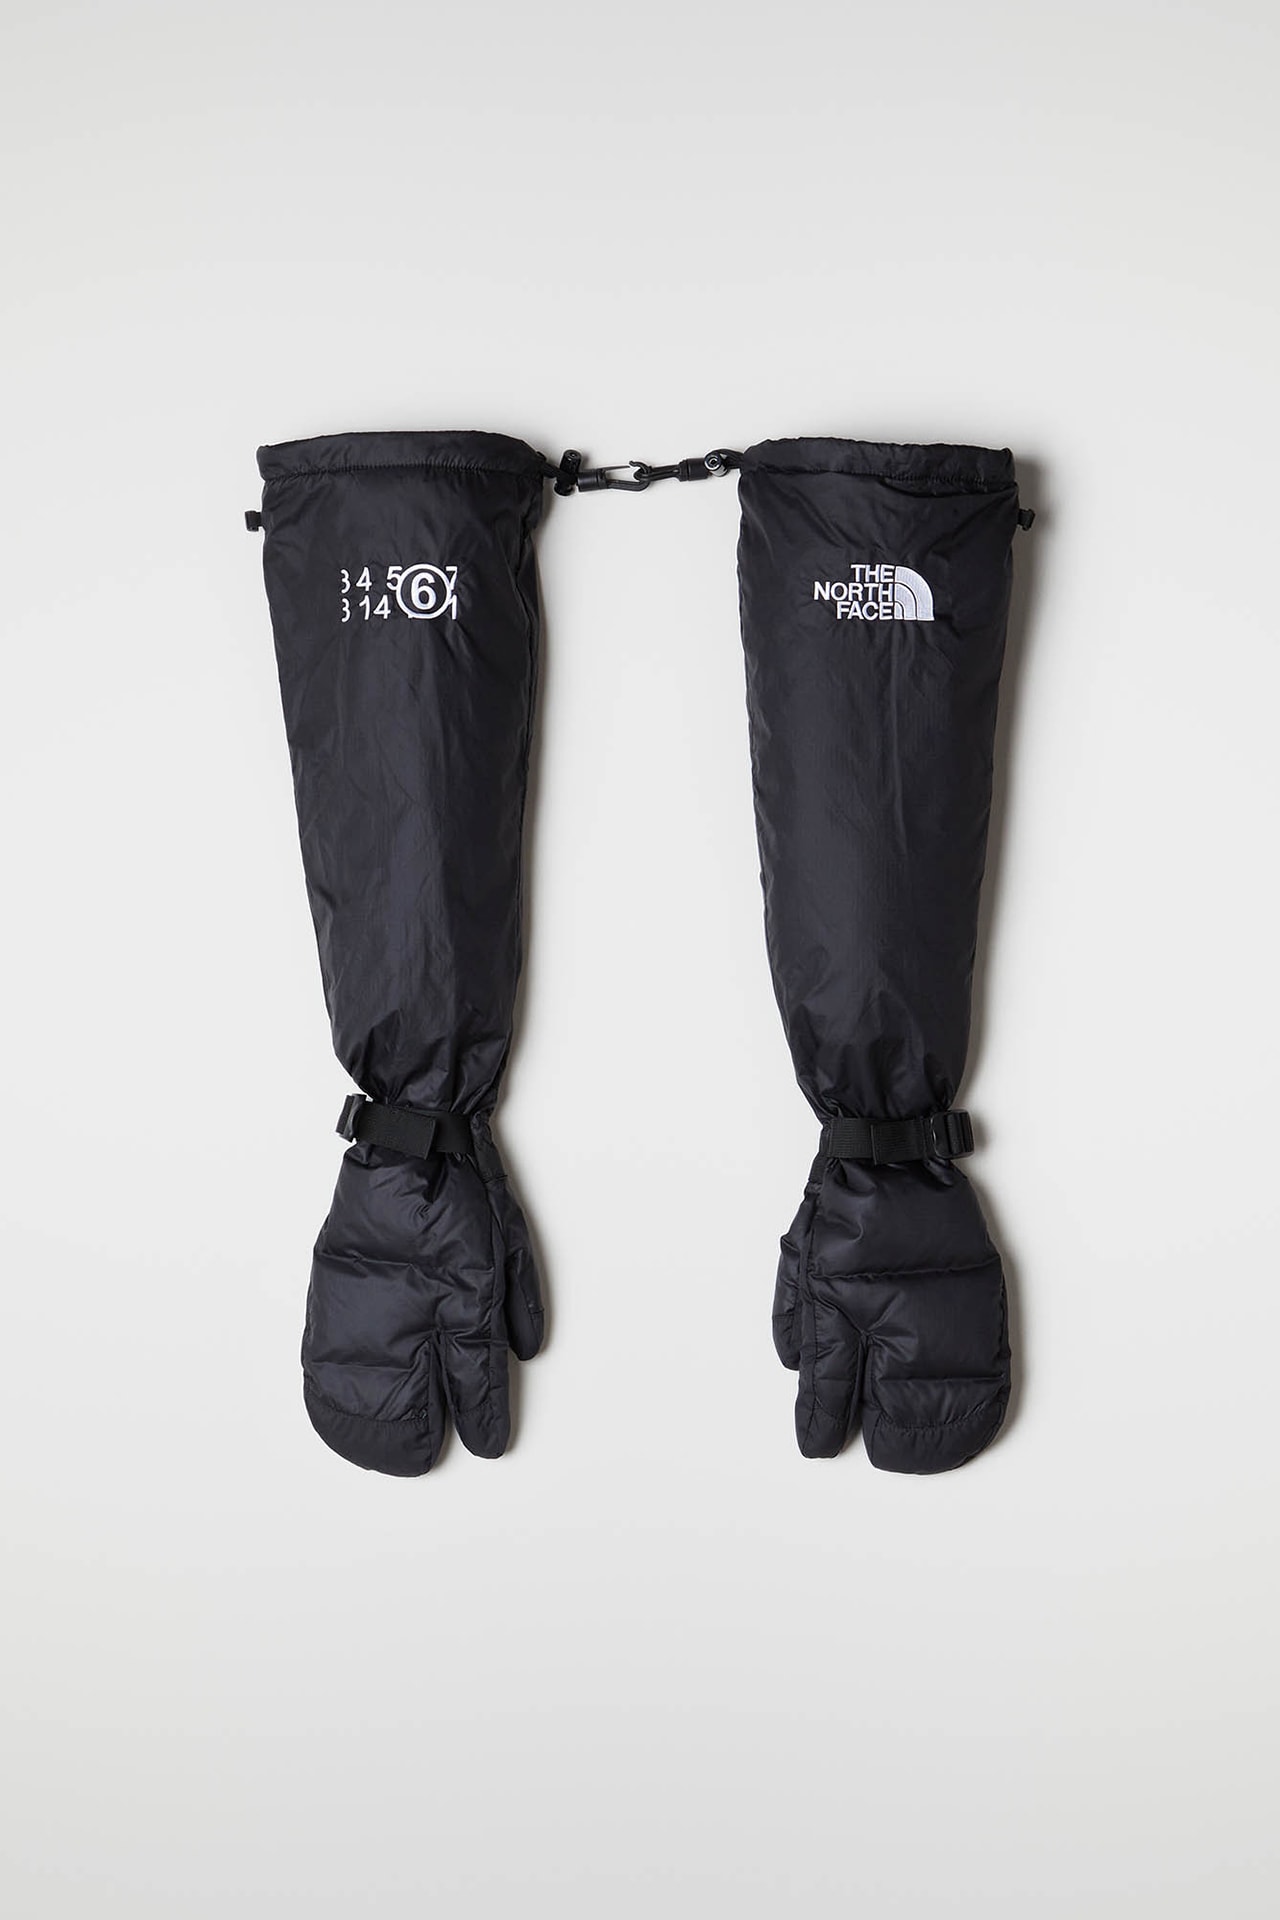 MM6 Maison Margiela The North Face Collaboration Fall Winter 2020 Tabi Mittens Black